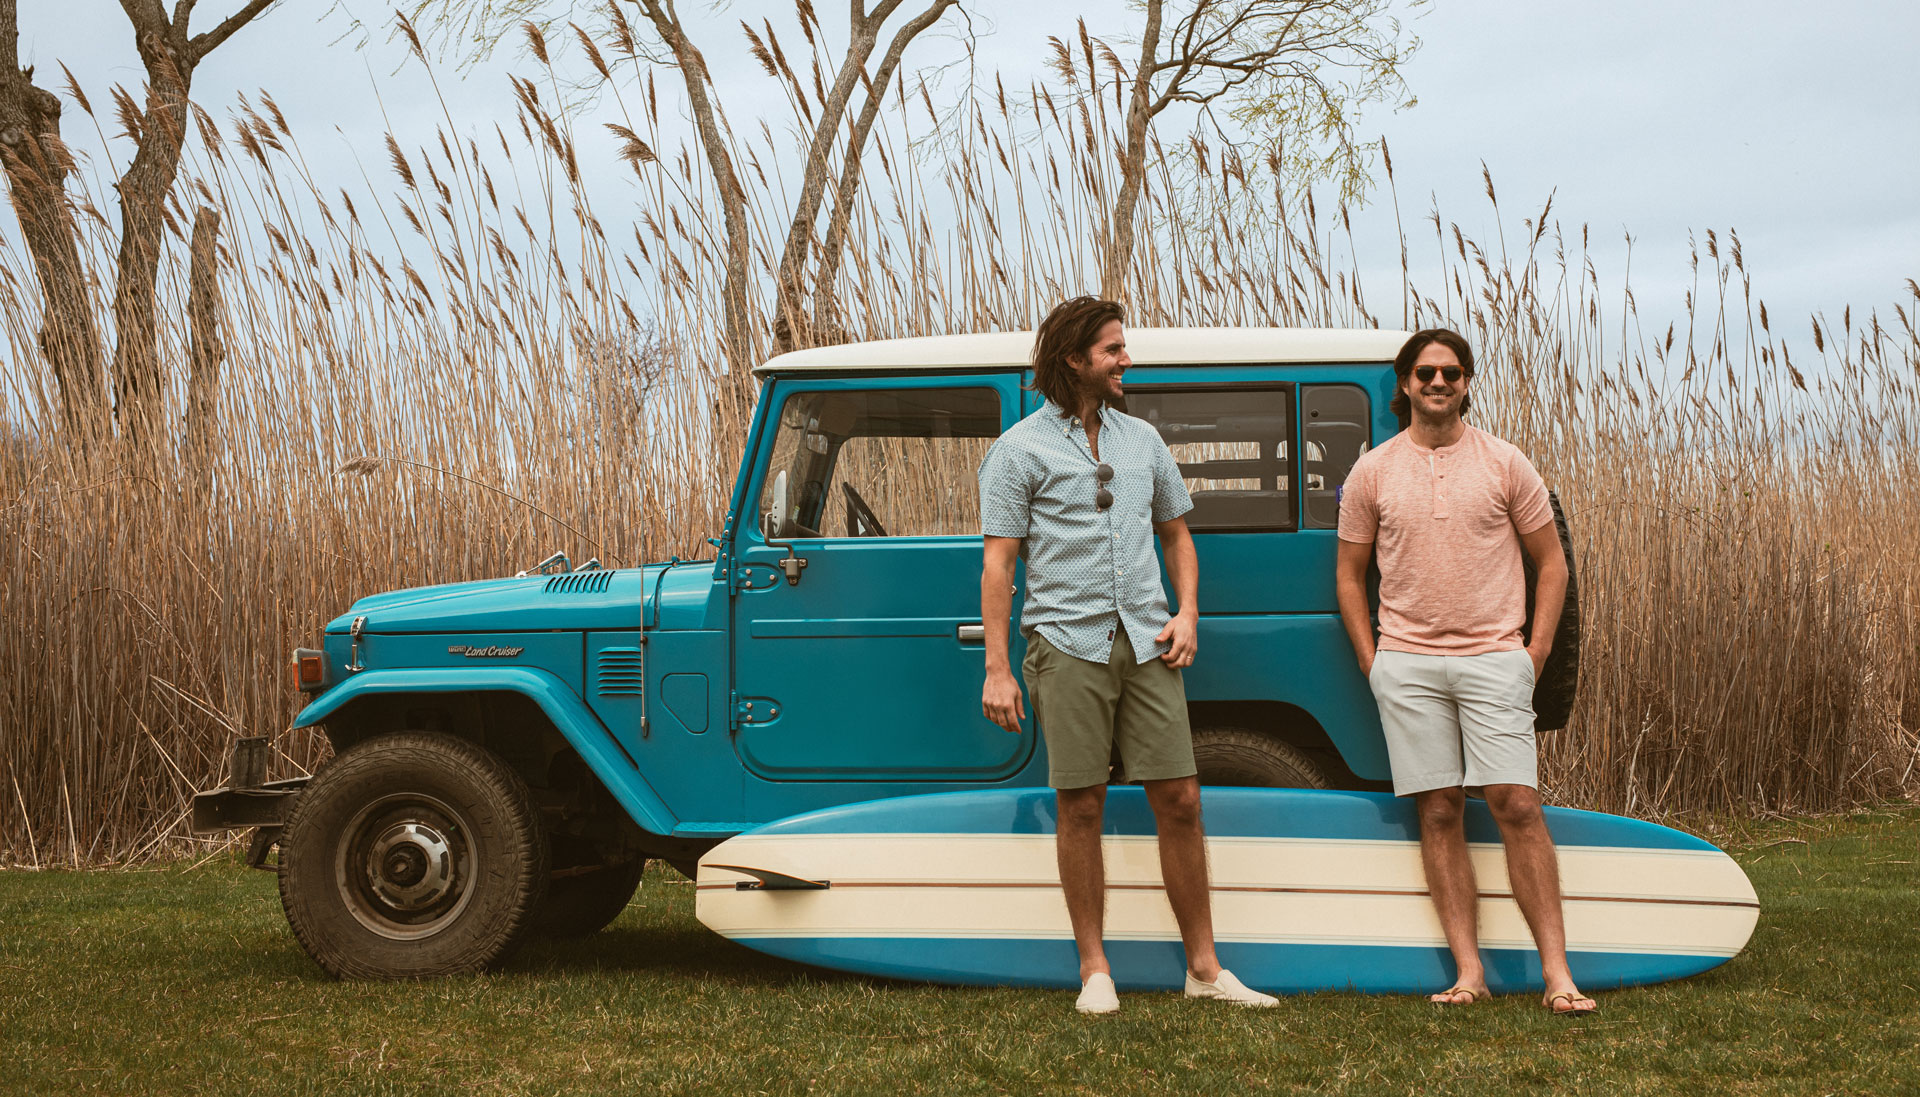 Meet Mike and Alex Faherty of Faherty Brand in Newbury Street